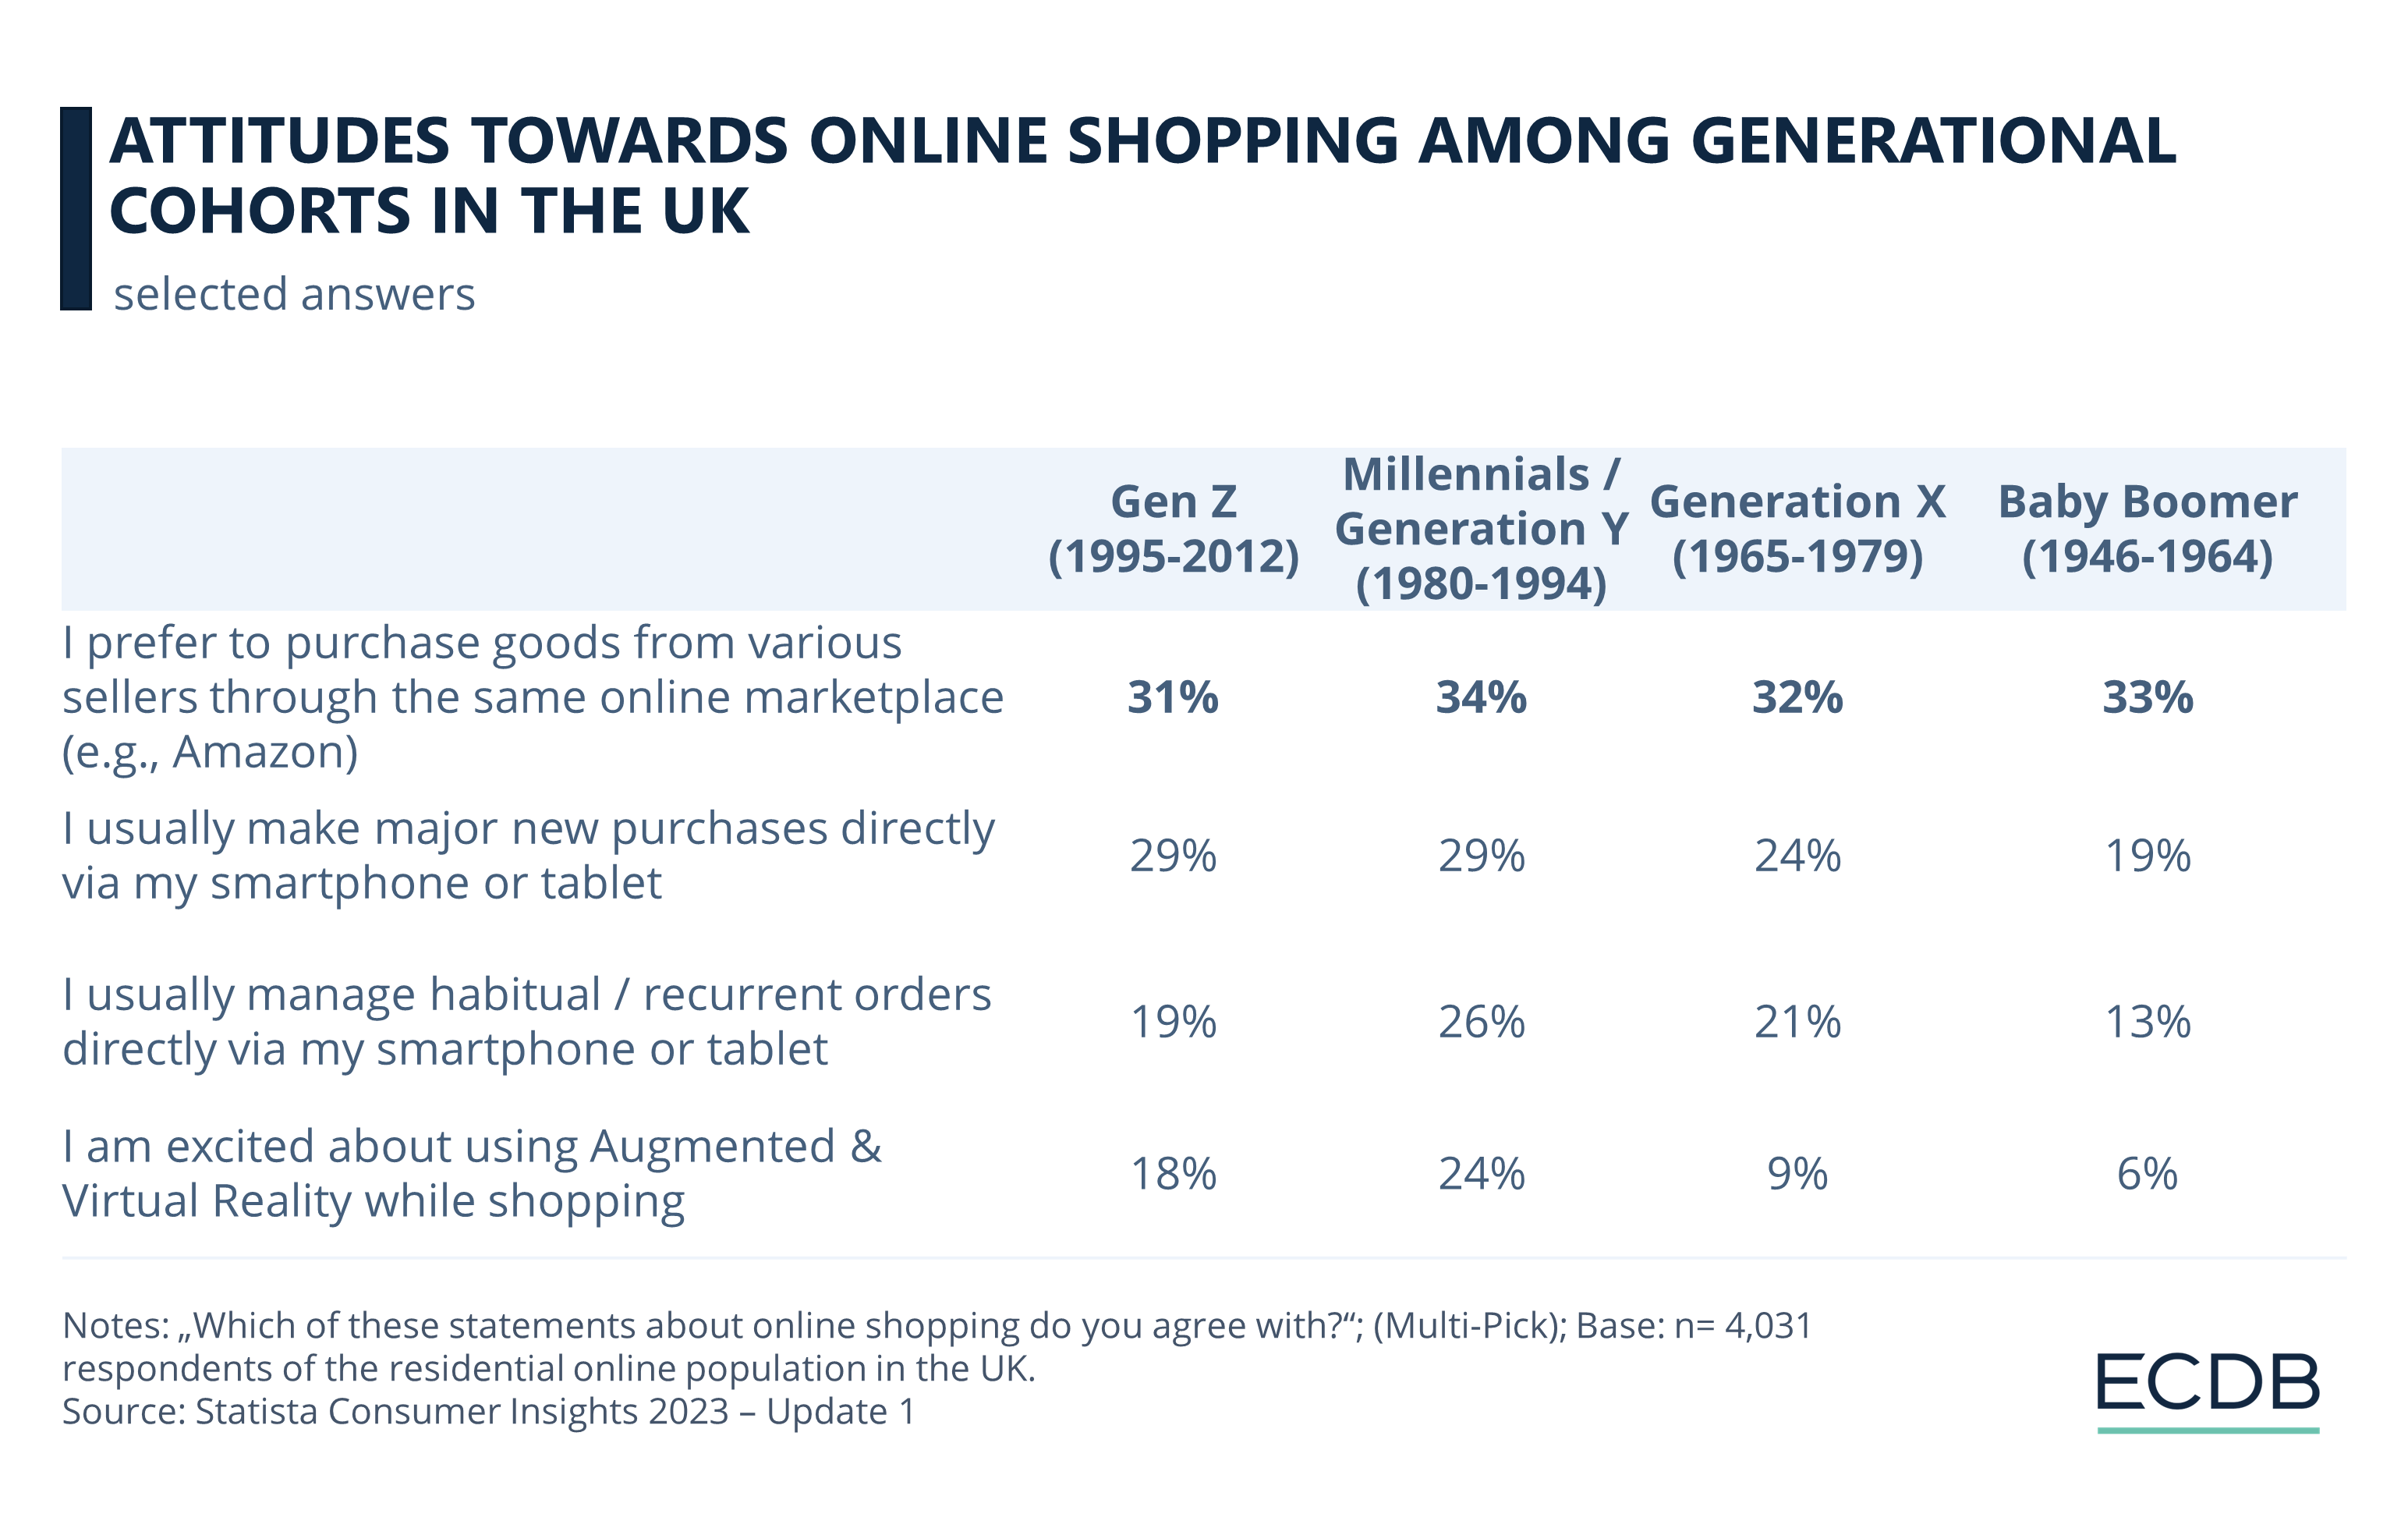 Attitudes Toward Online Shopping in the UK Among Generations